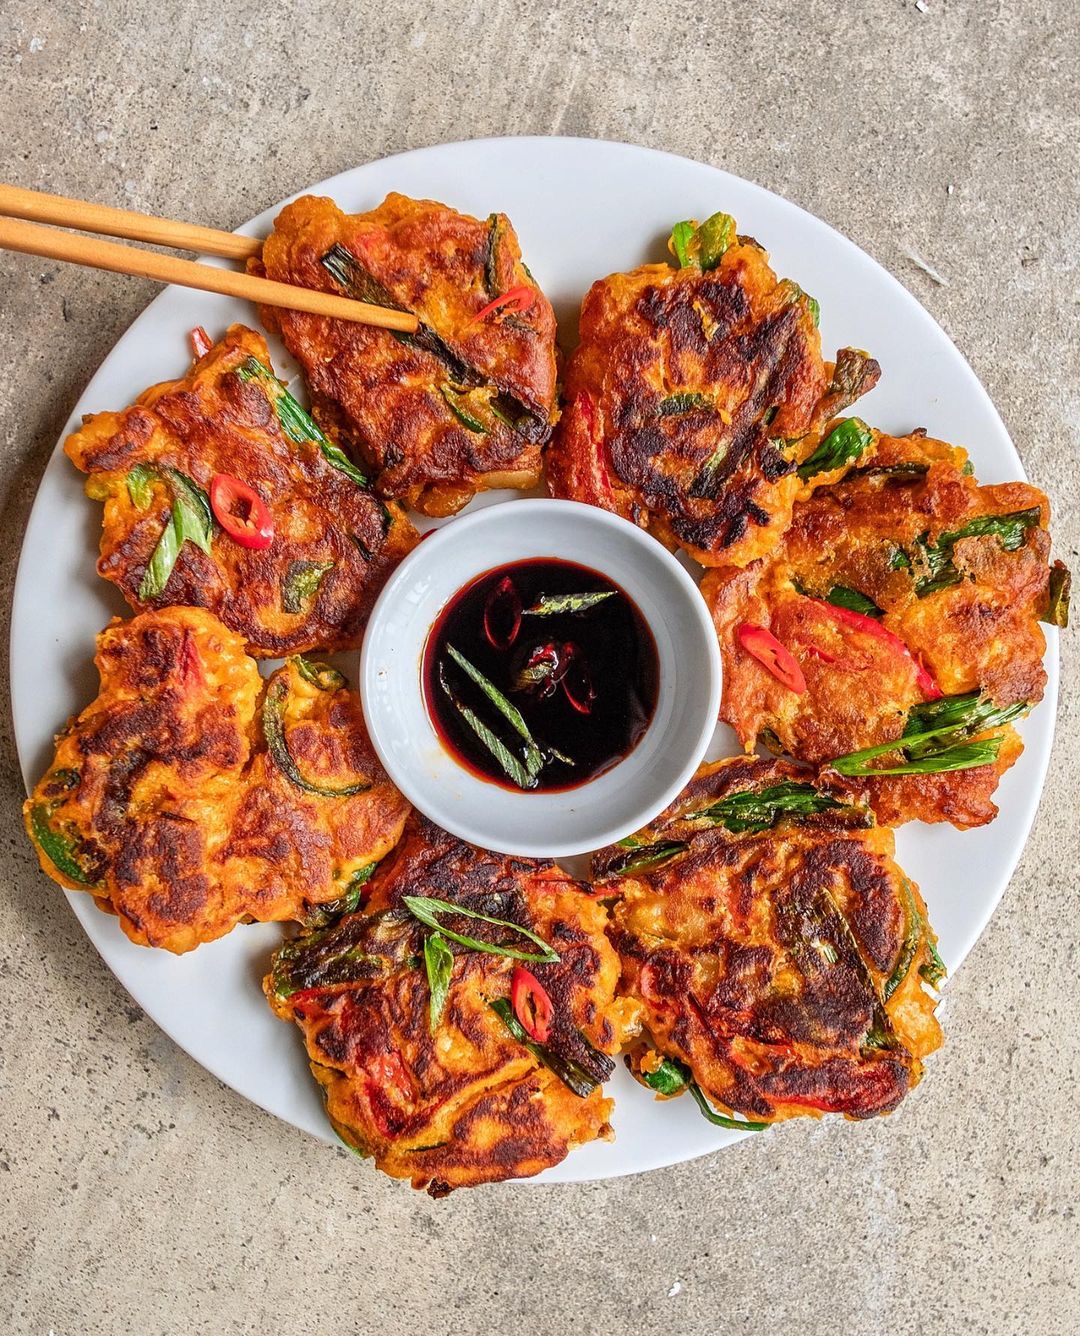 A plate of Hot Pajeon Pancakes served with a homemade dipping sauce and chopsticks.